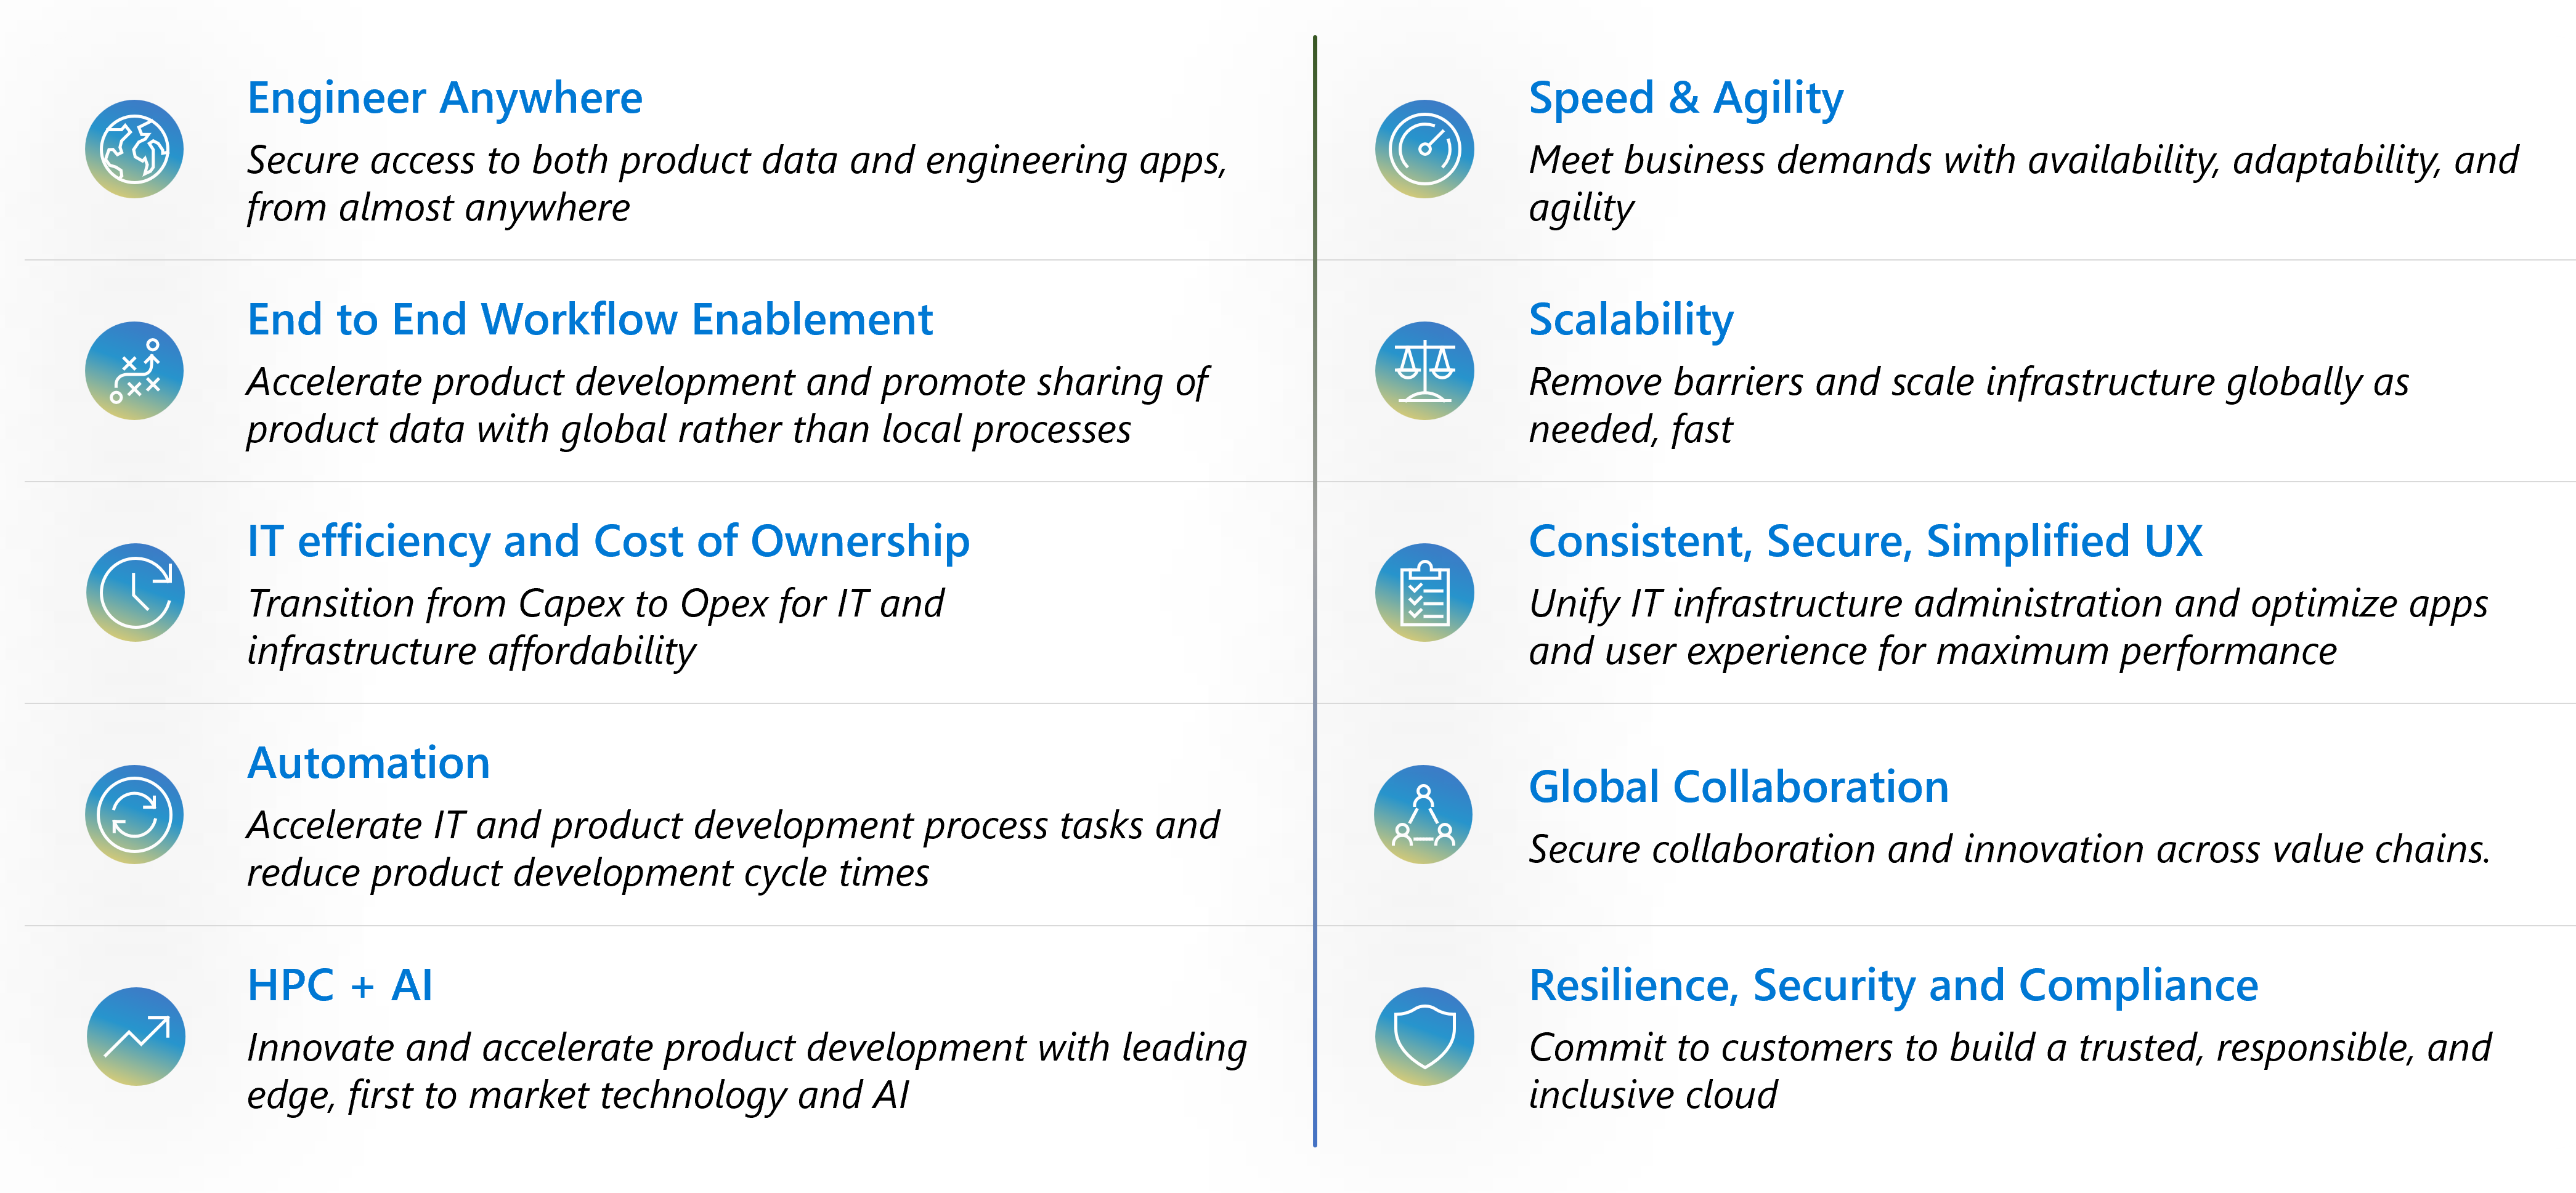 The image shows the benefits of migrating PLM solutions to Azure.